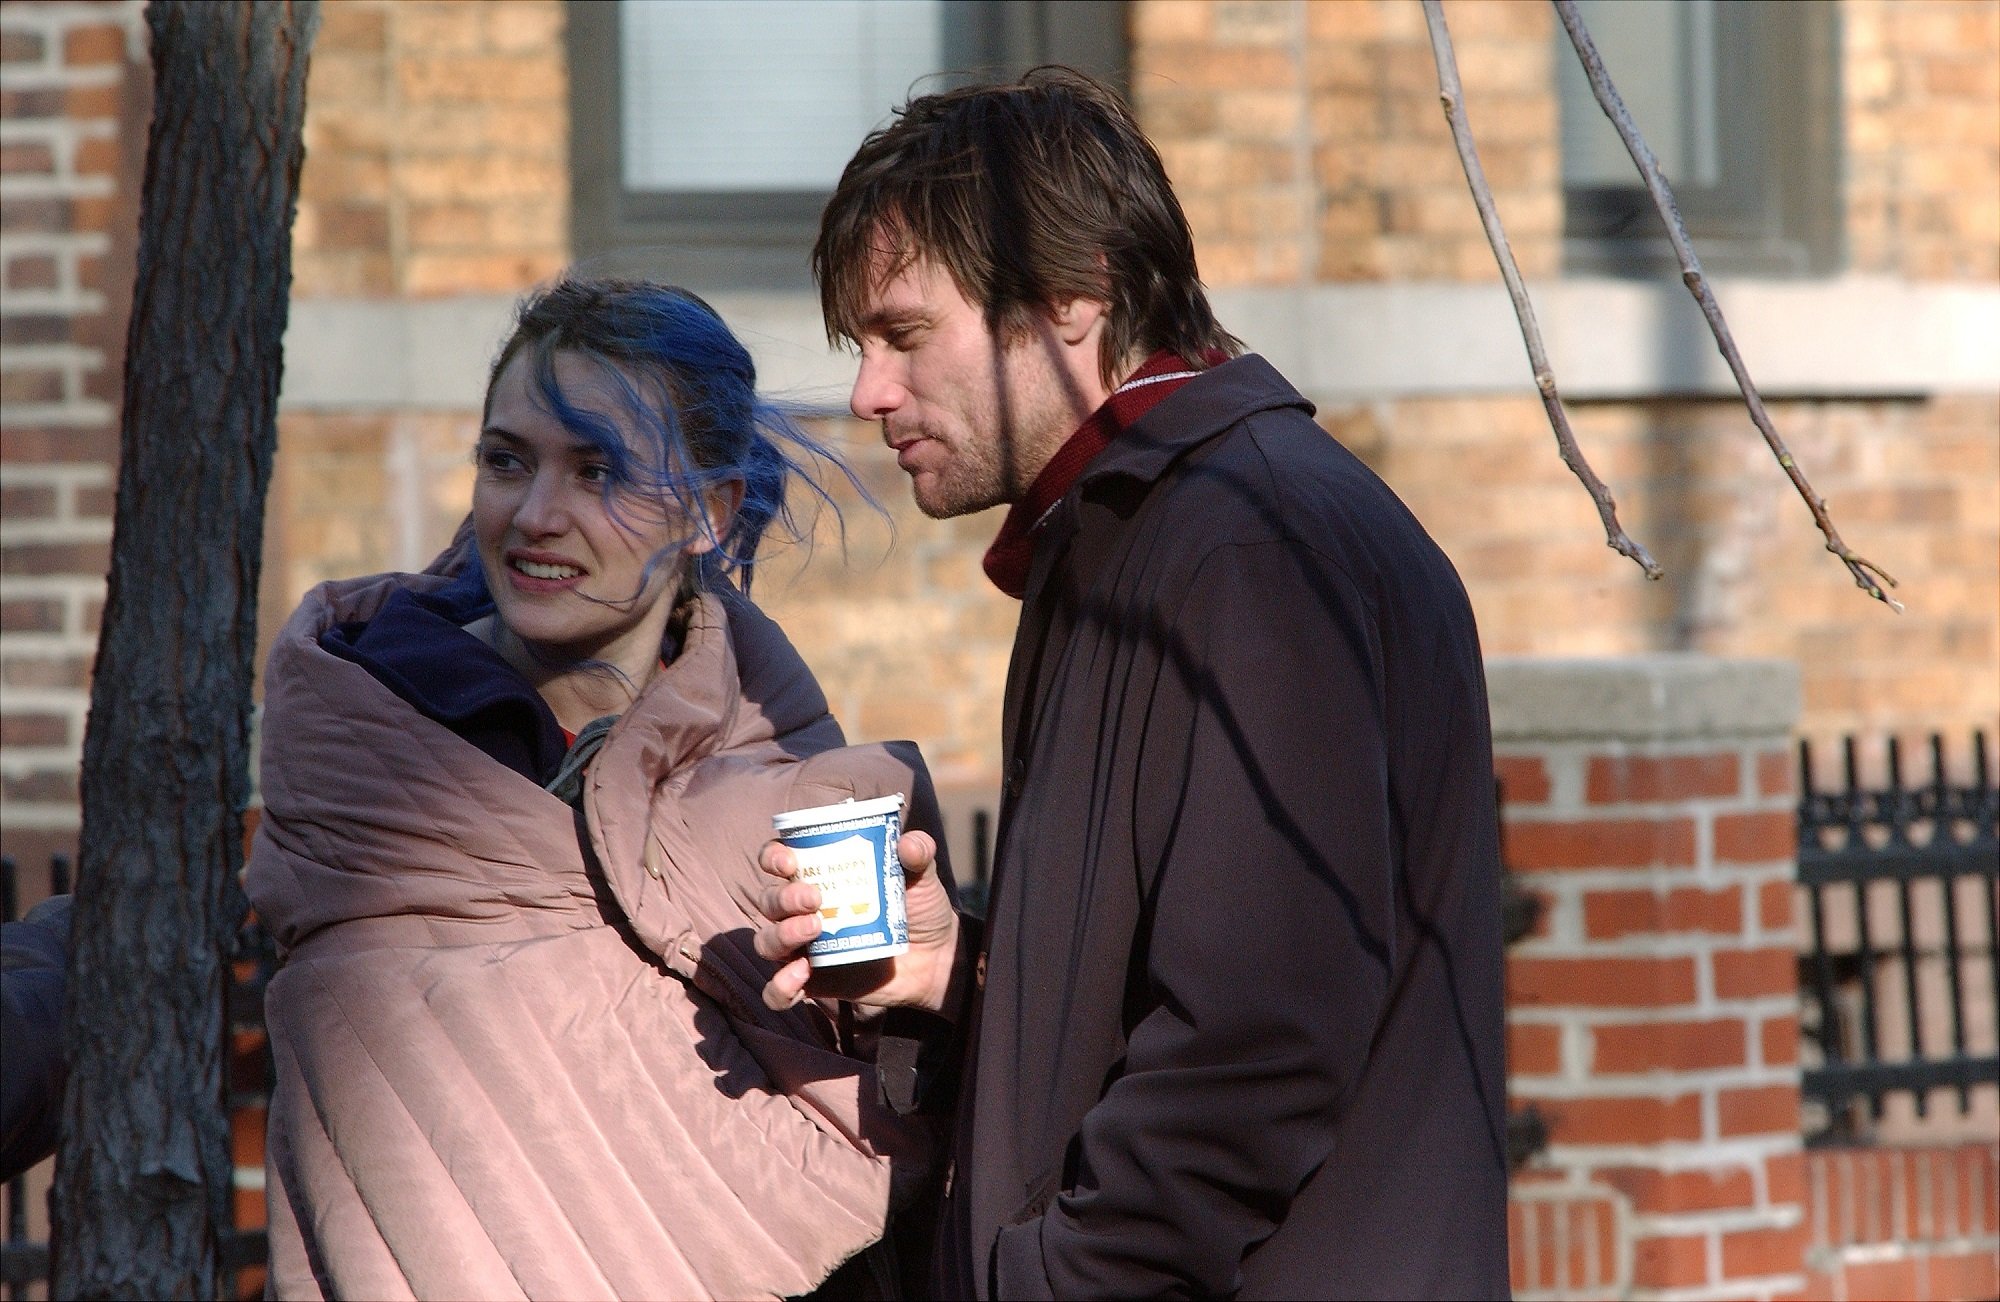 Jim Carrey and Kate Winslet prepare for a scene in Eternal Sunshine of the Spotless Mind